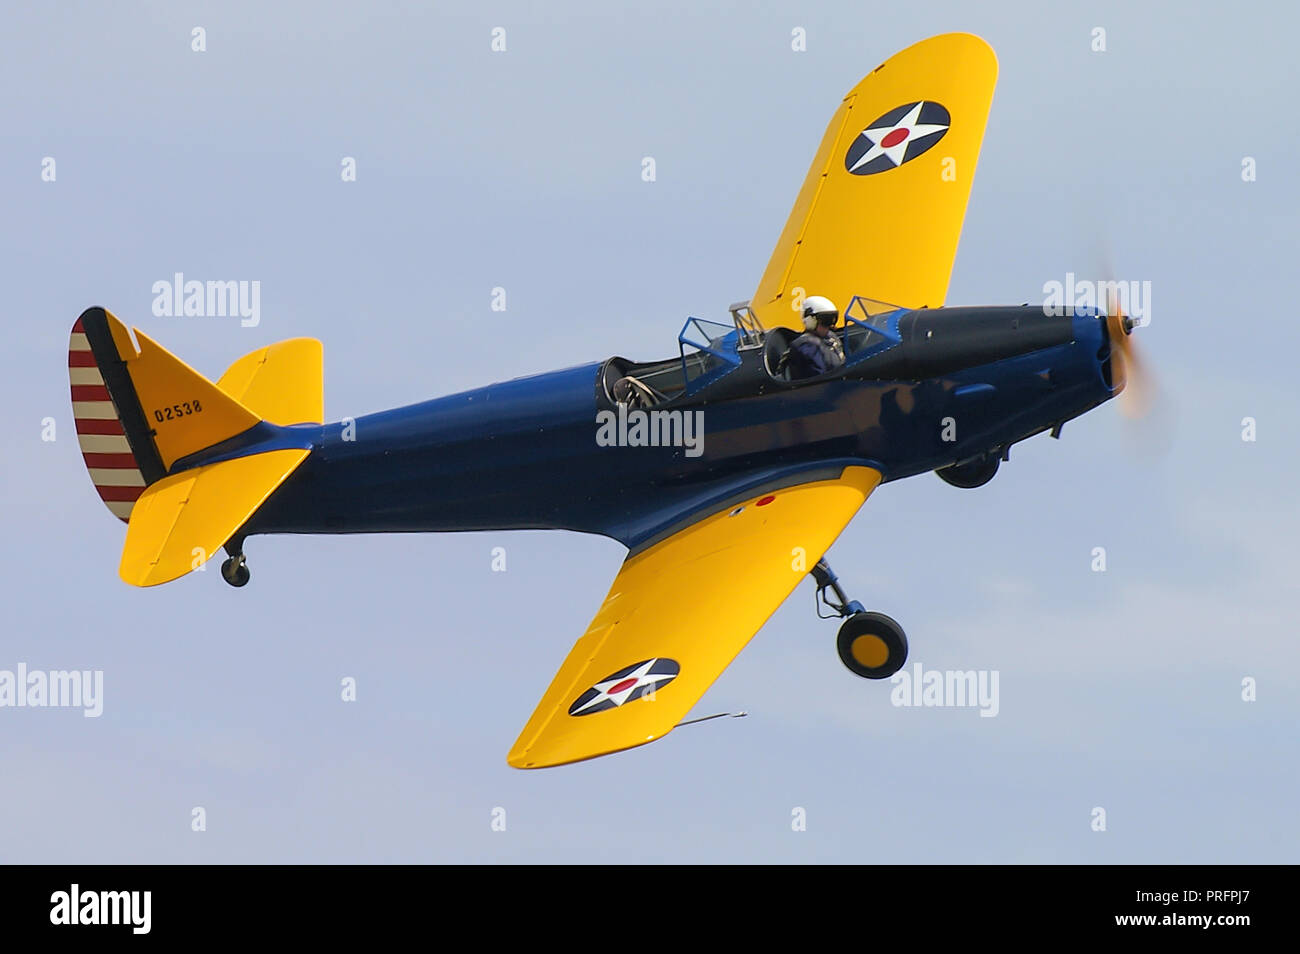 Fairchild PT-19 Cornell plane flying at an airshow. Second World War primary trainer for the United States Army Air Corps with old style markings Stock Photo